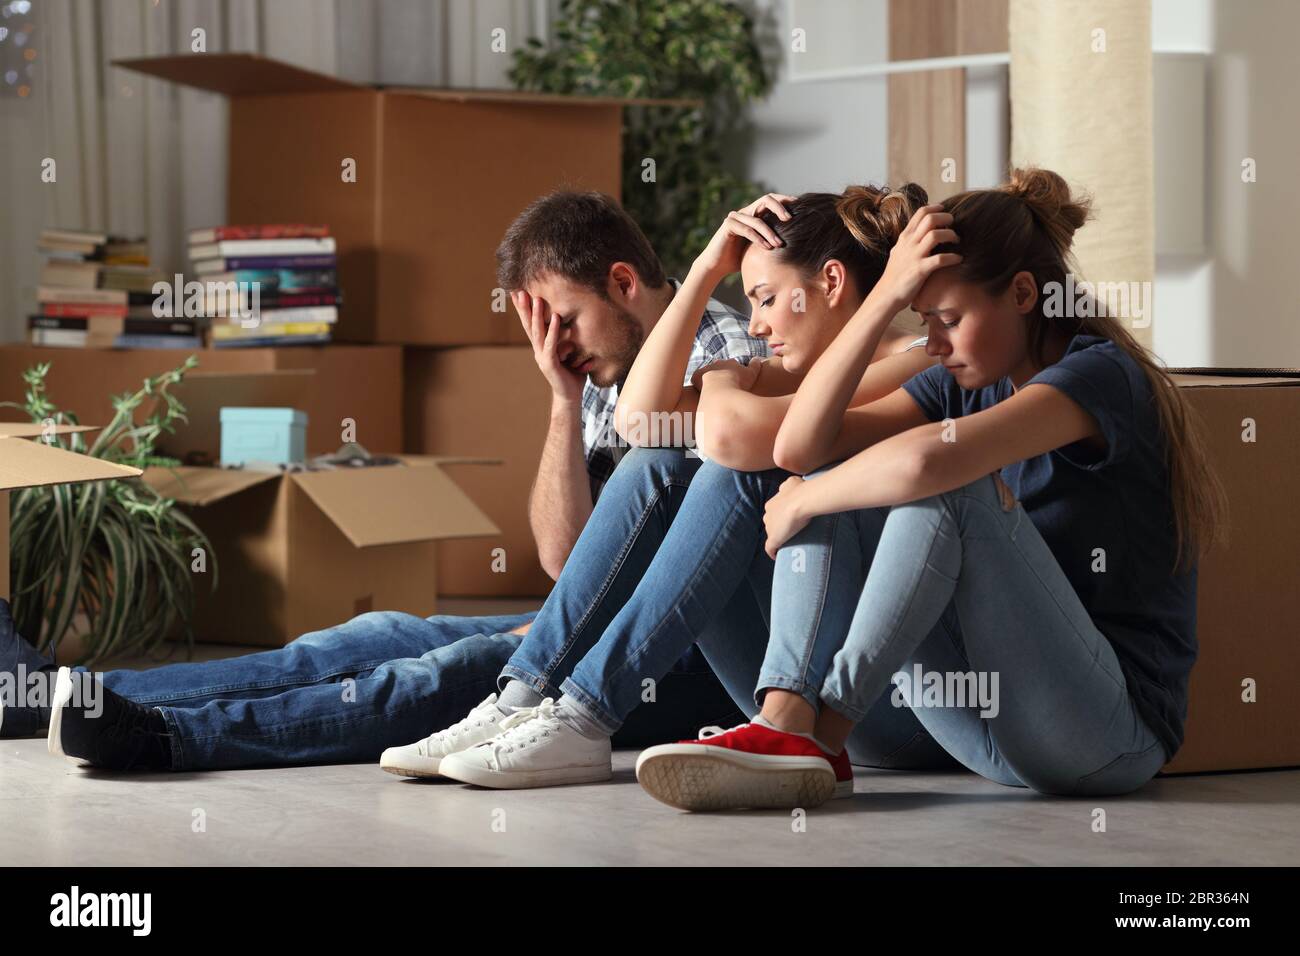 Three sad evicted roommates moving home complaining sitting on the floor Stock Photo